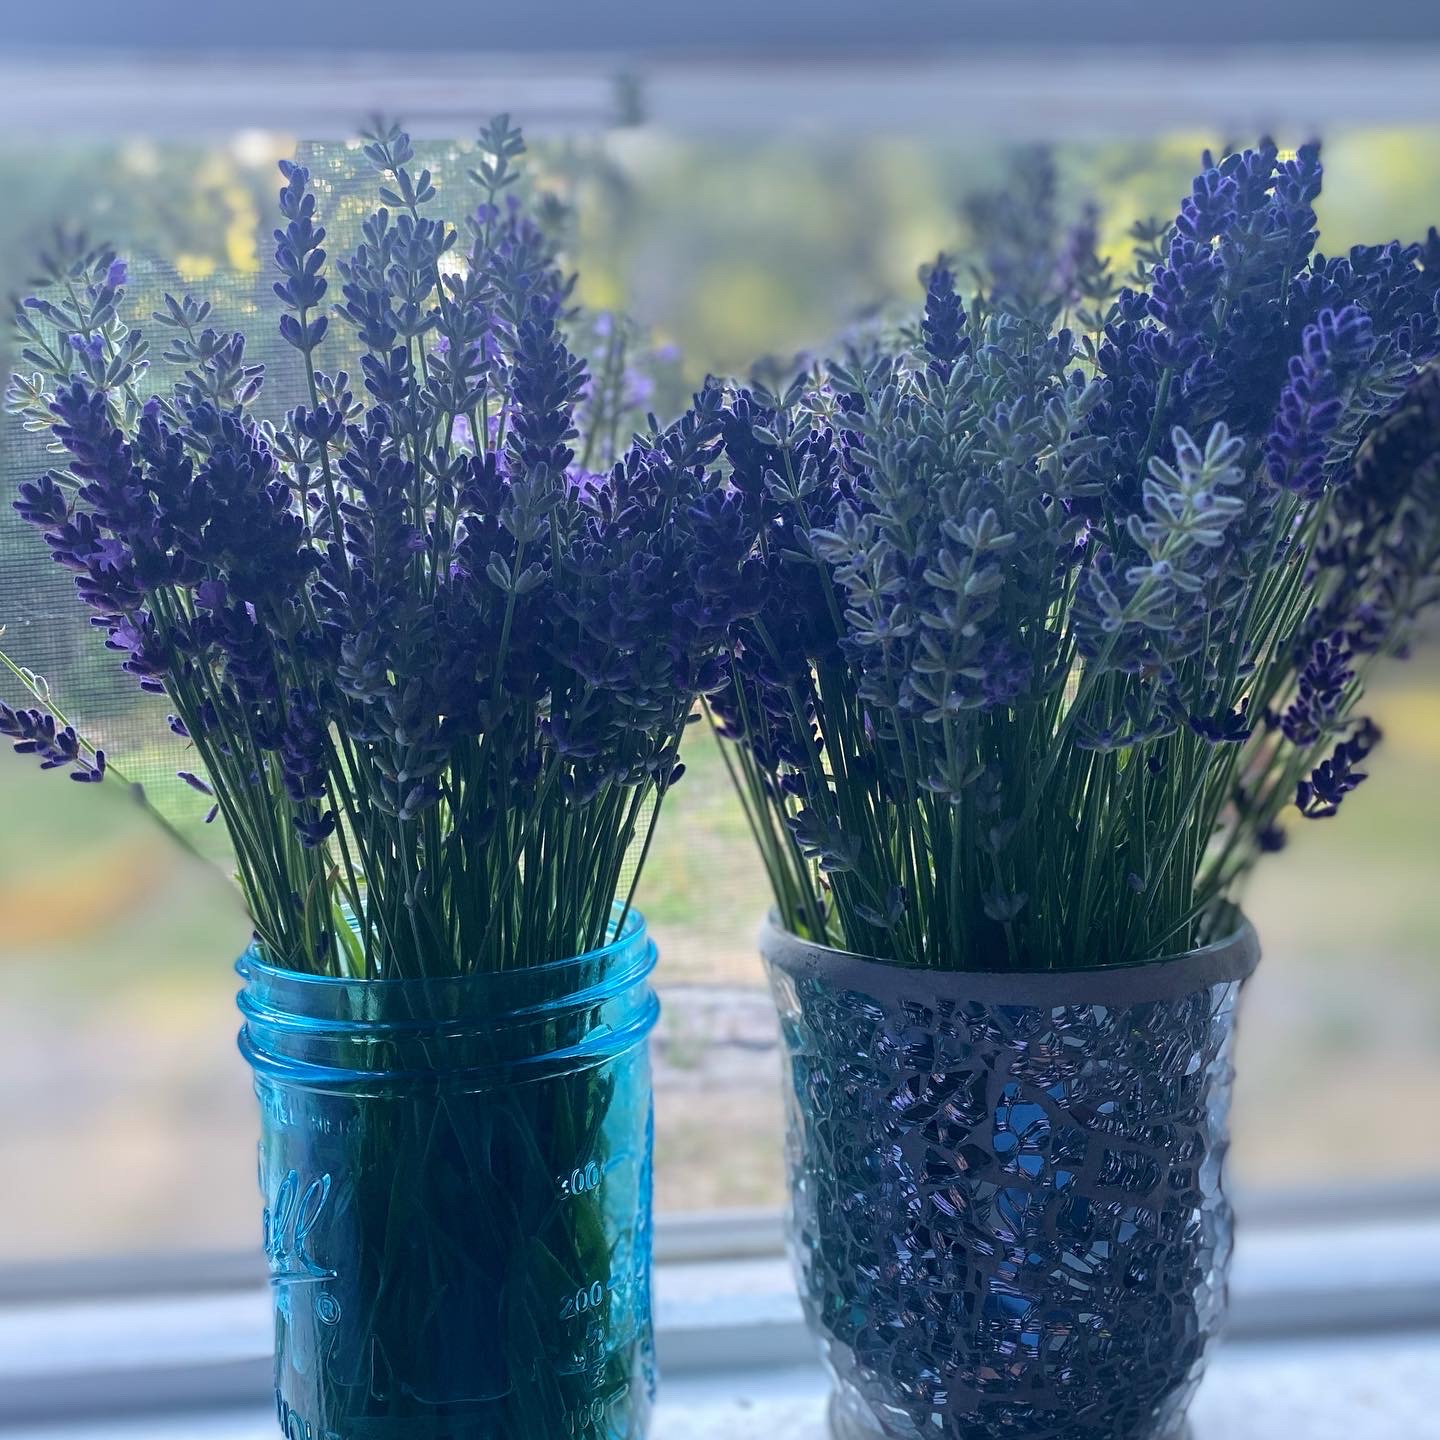 What time of the year does lavender bloom in Michigan?